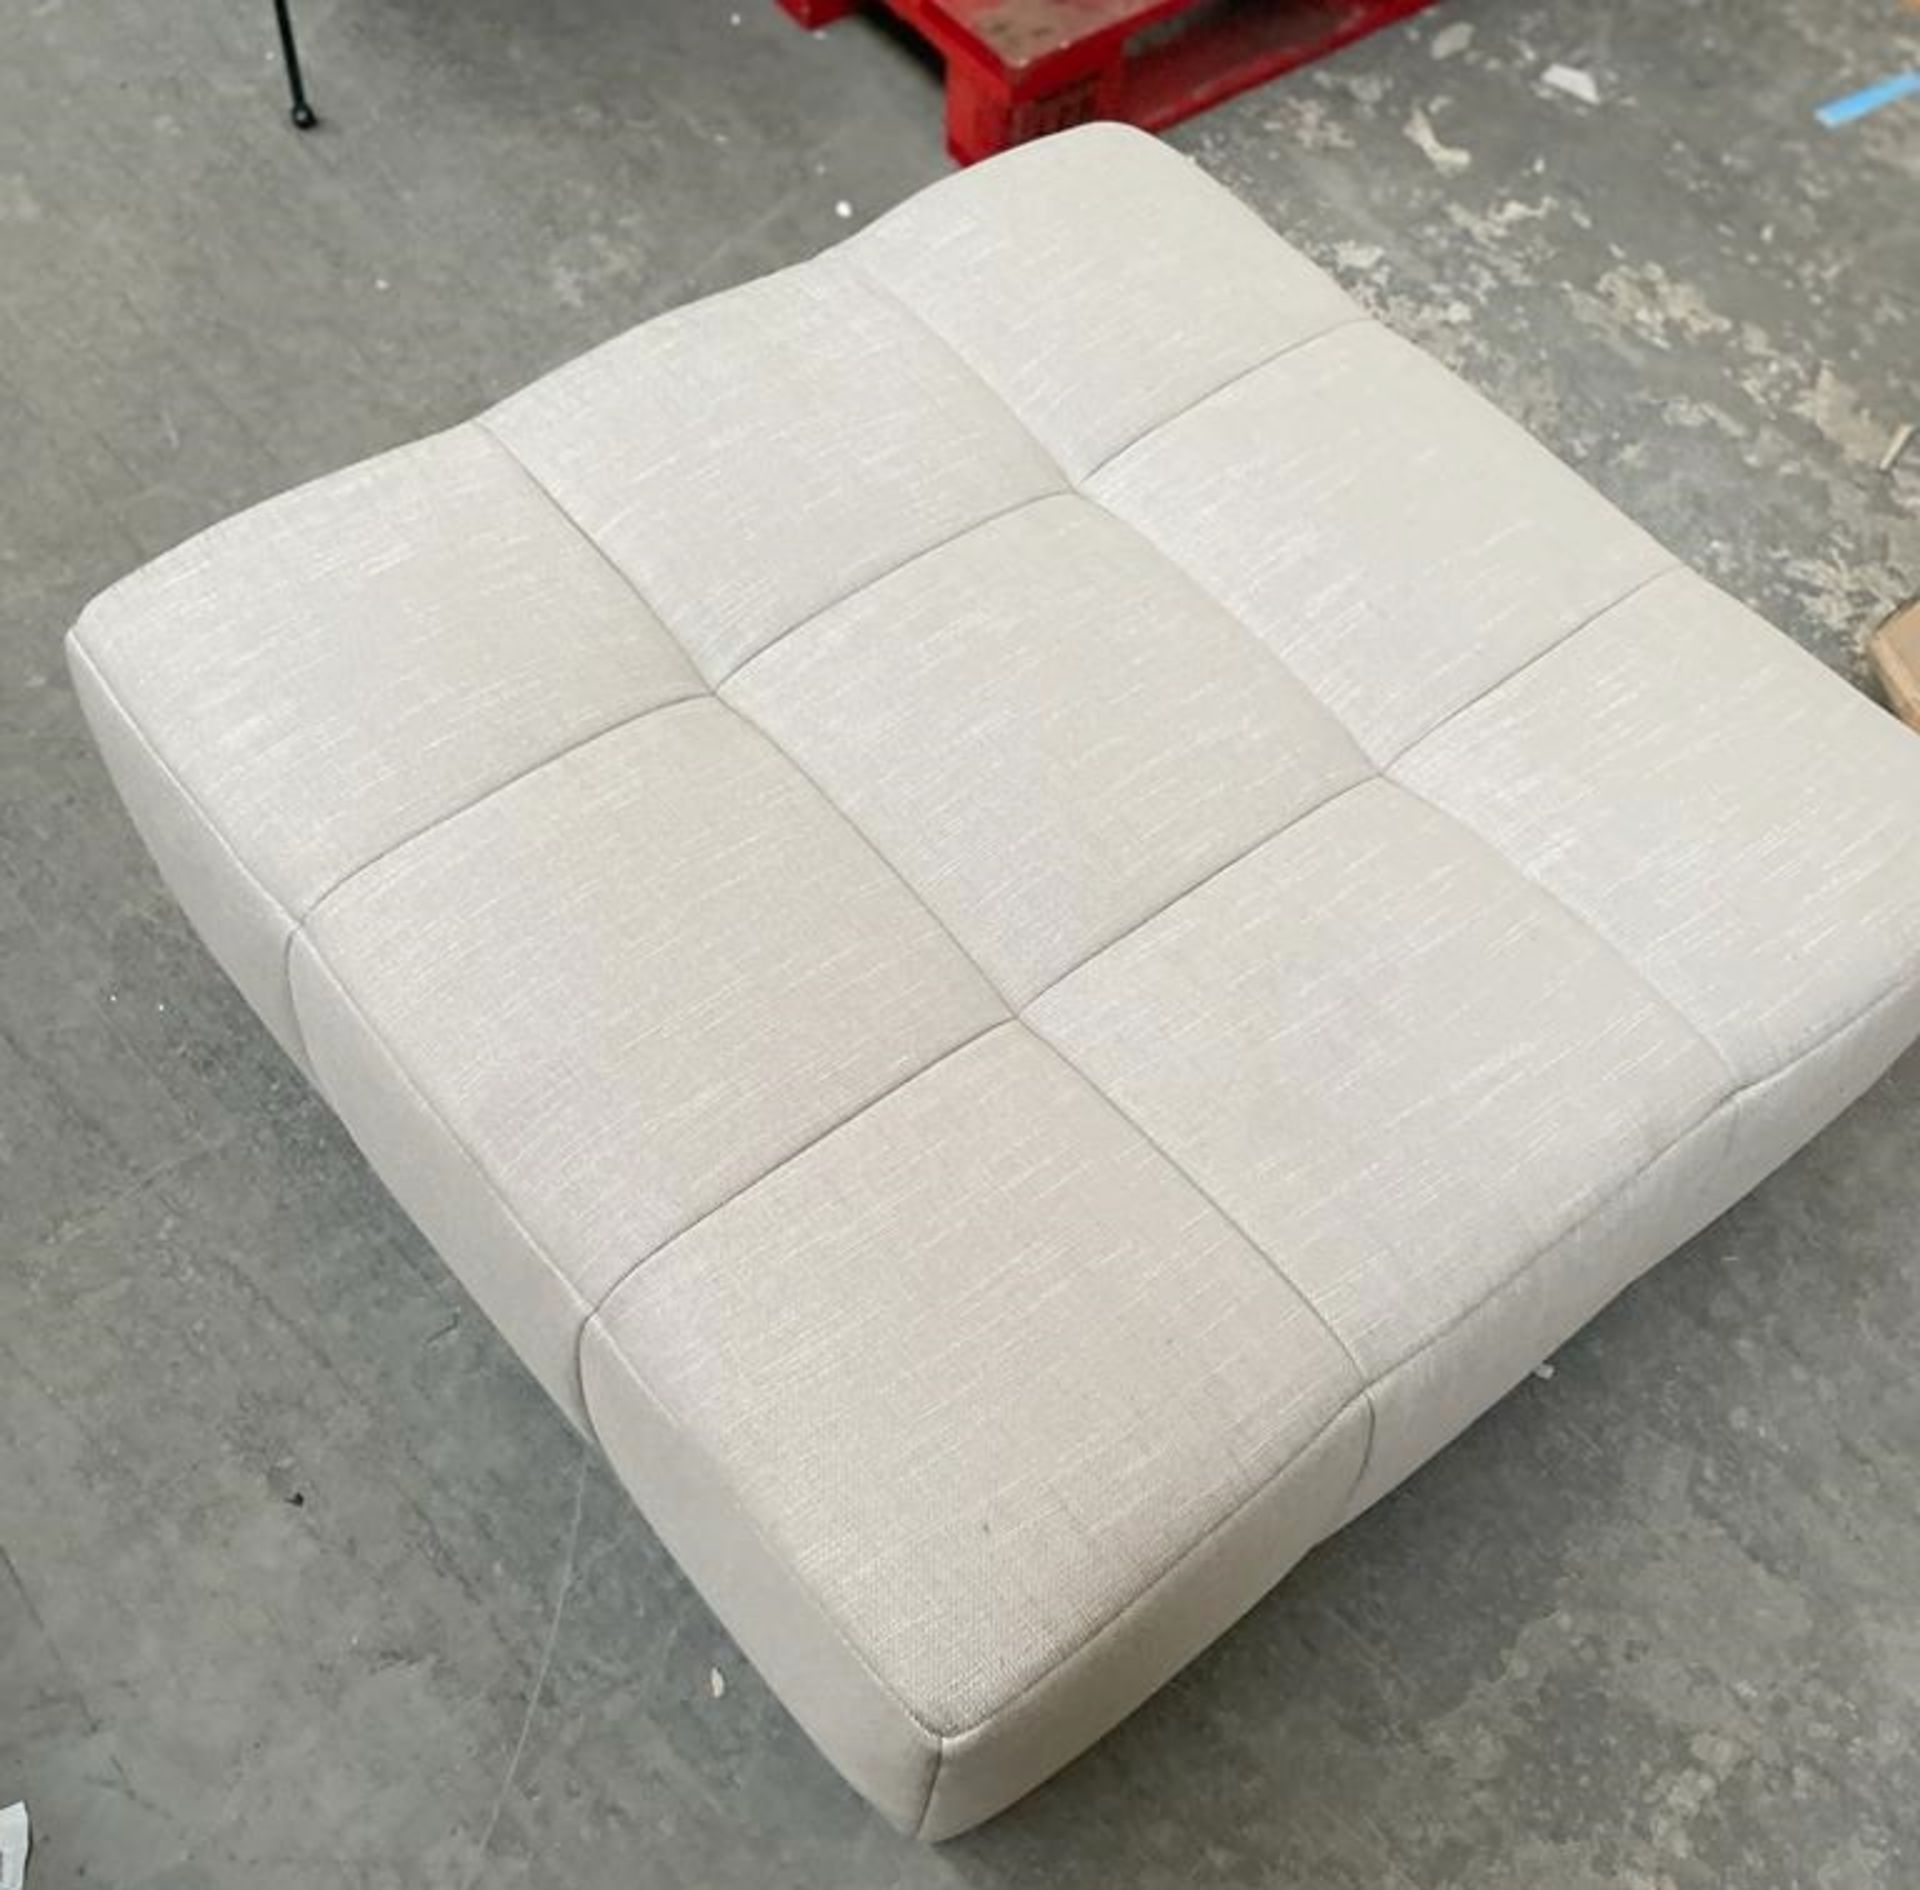 1 x Cloud9 Large Upholstered Foot Stool In A Stone Effect Shade - Dimensions: 35(h) x 90(d) x 90( - Image 2 of 4